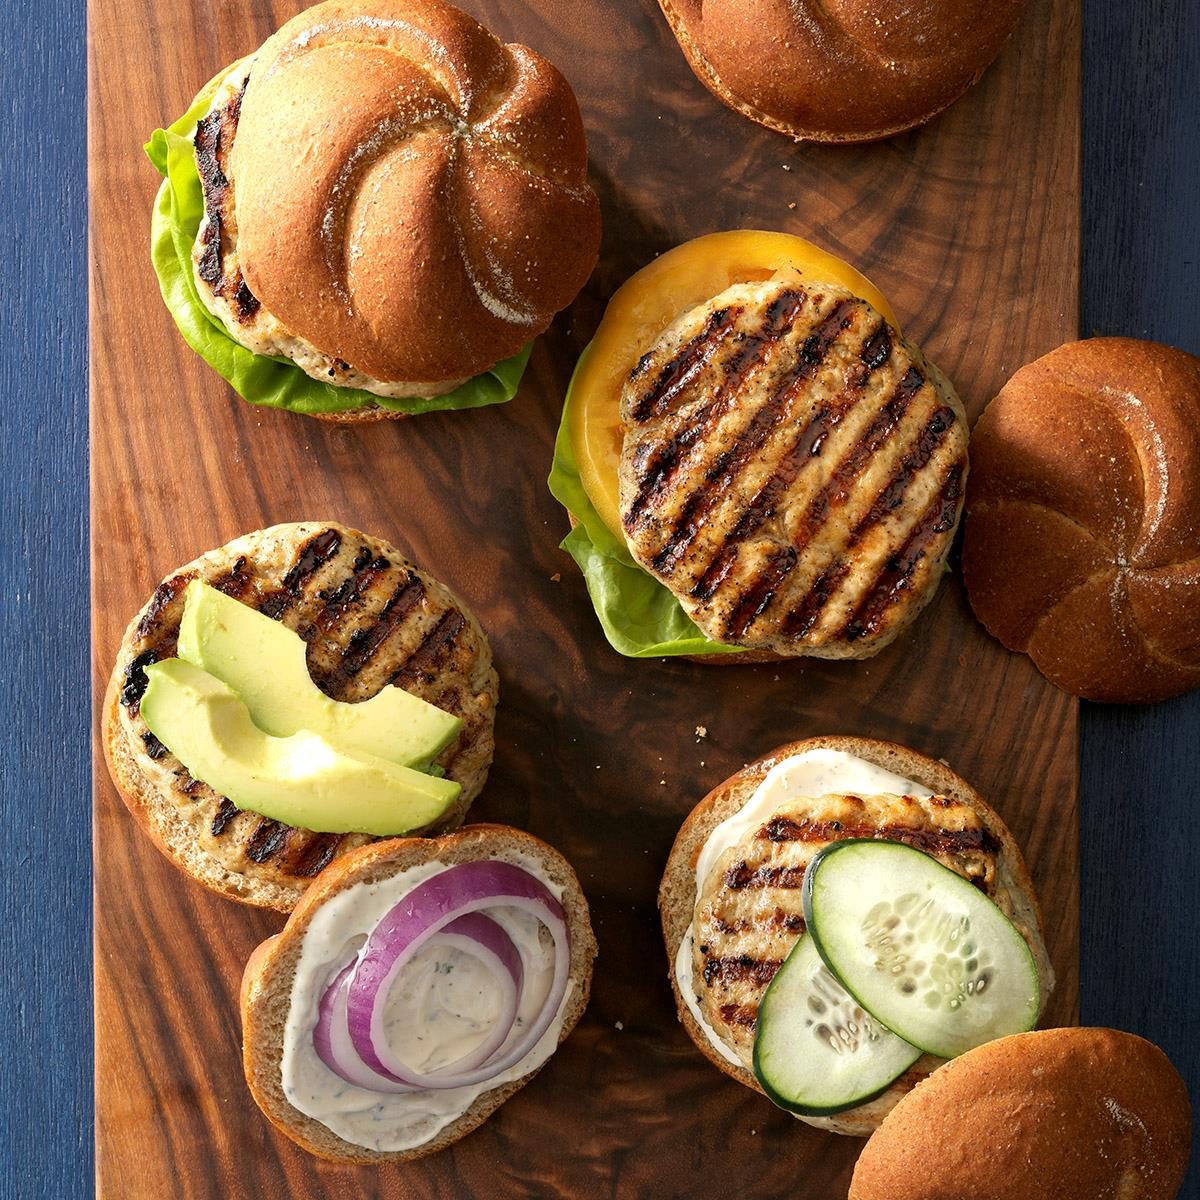 Day 3: Grilled Chicken Ranch Burgers